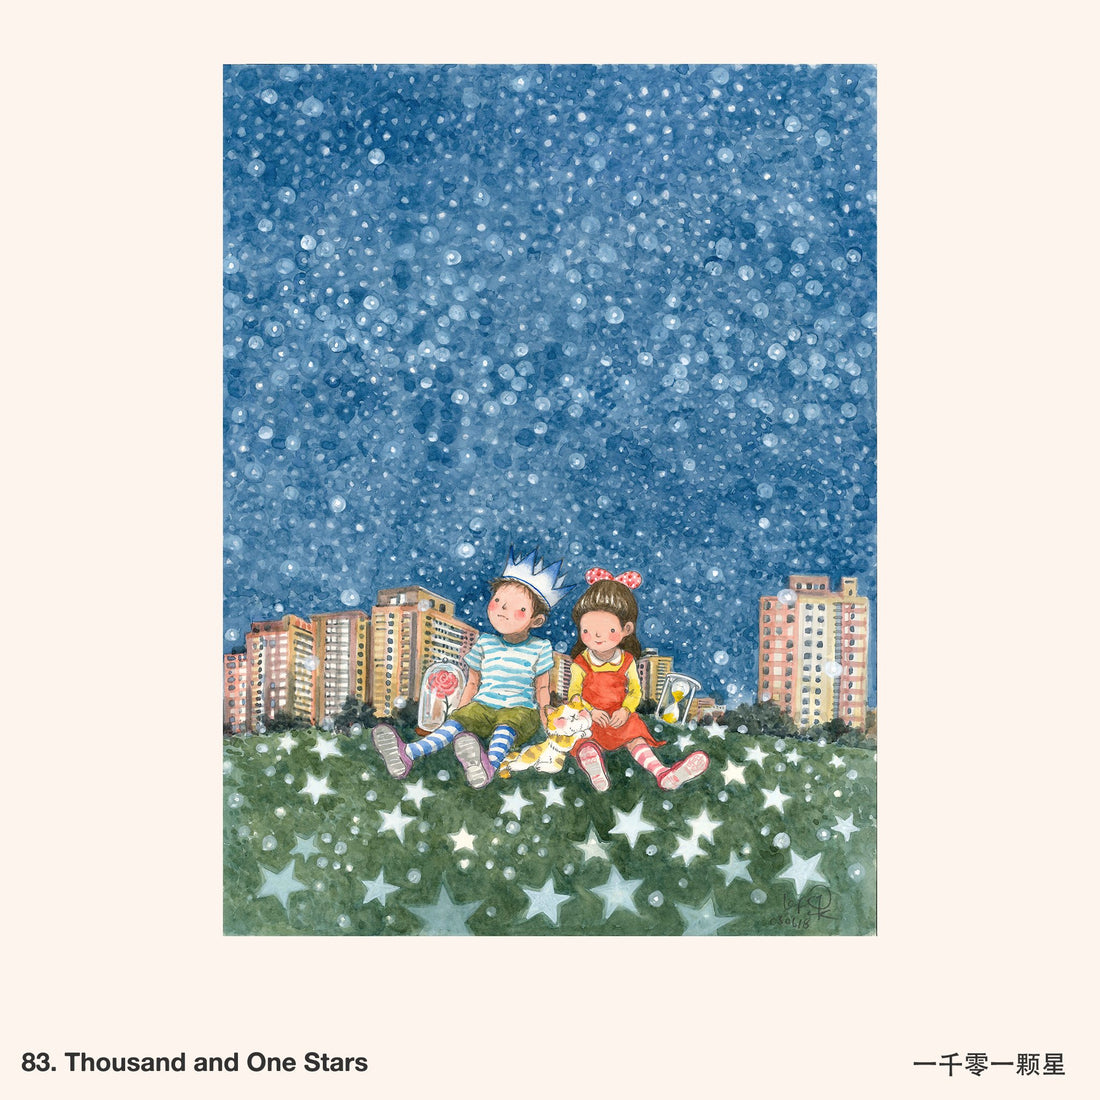 83. Thousand and One Stars Artwork